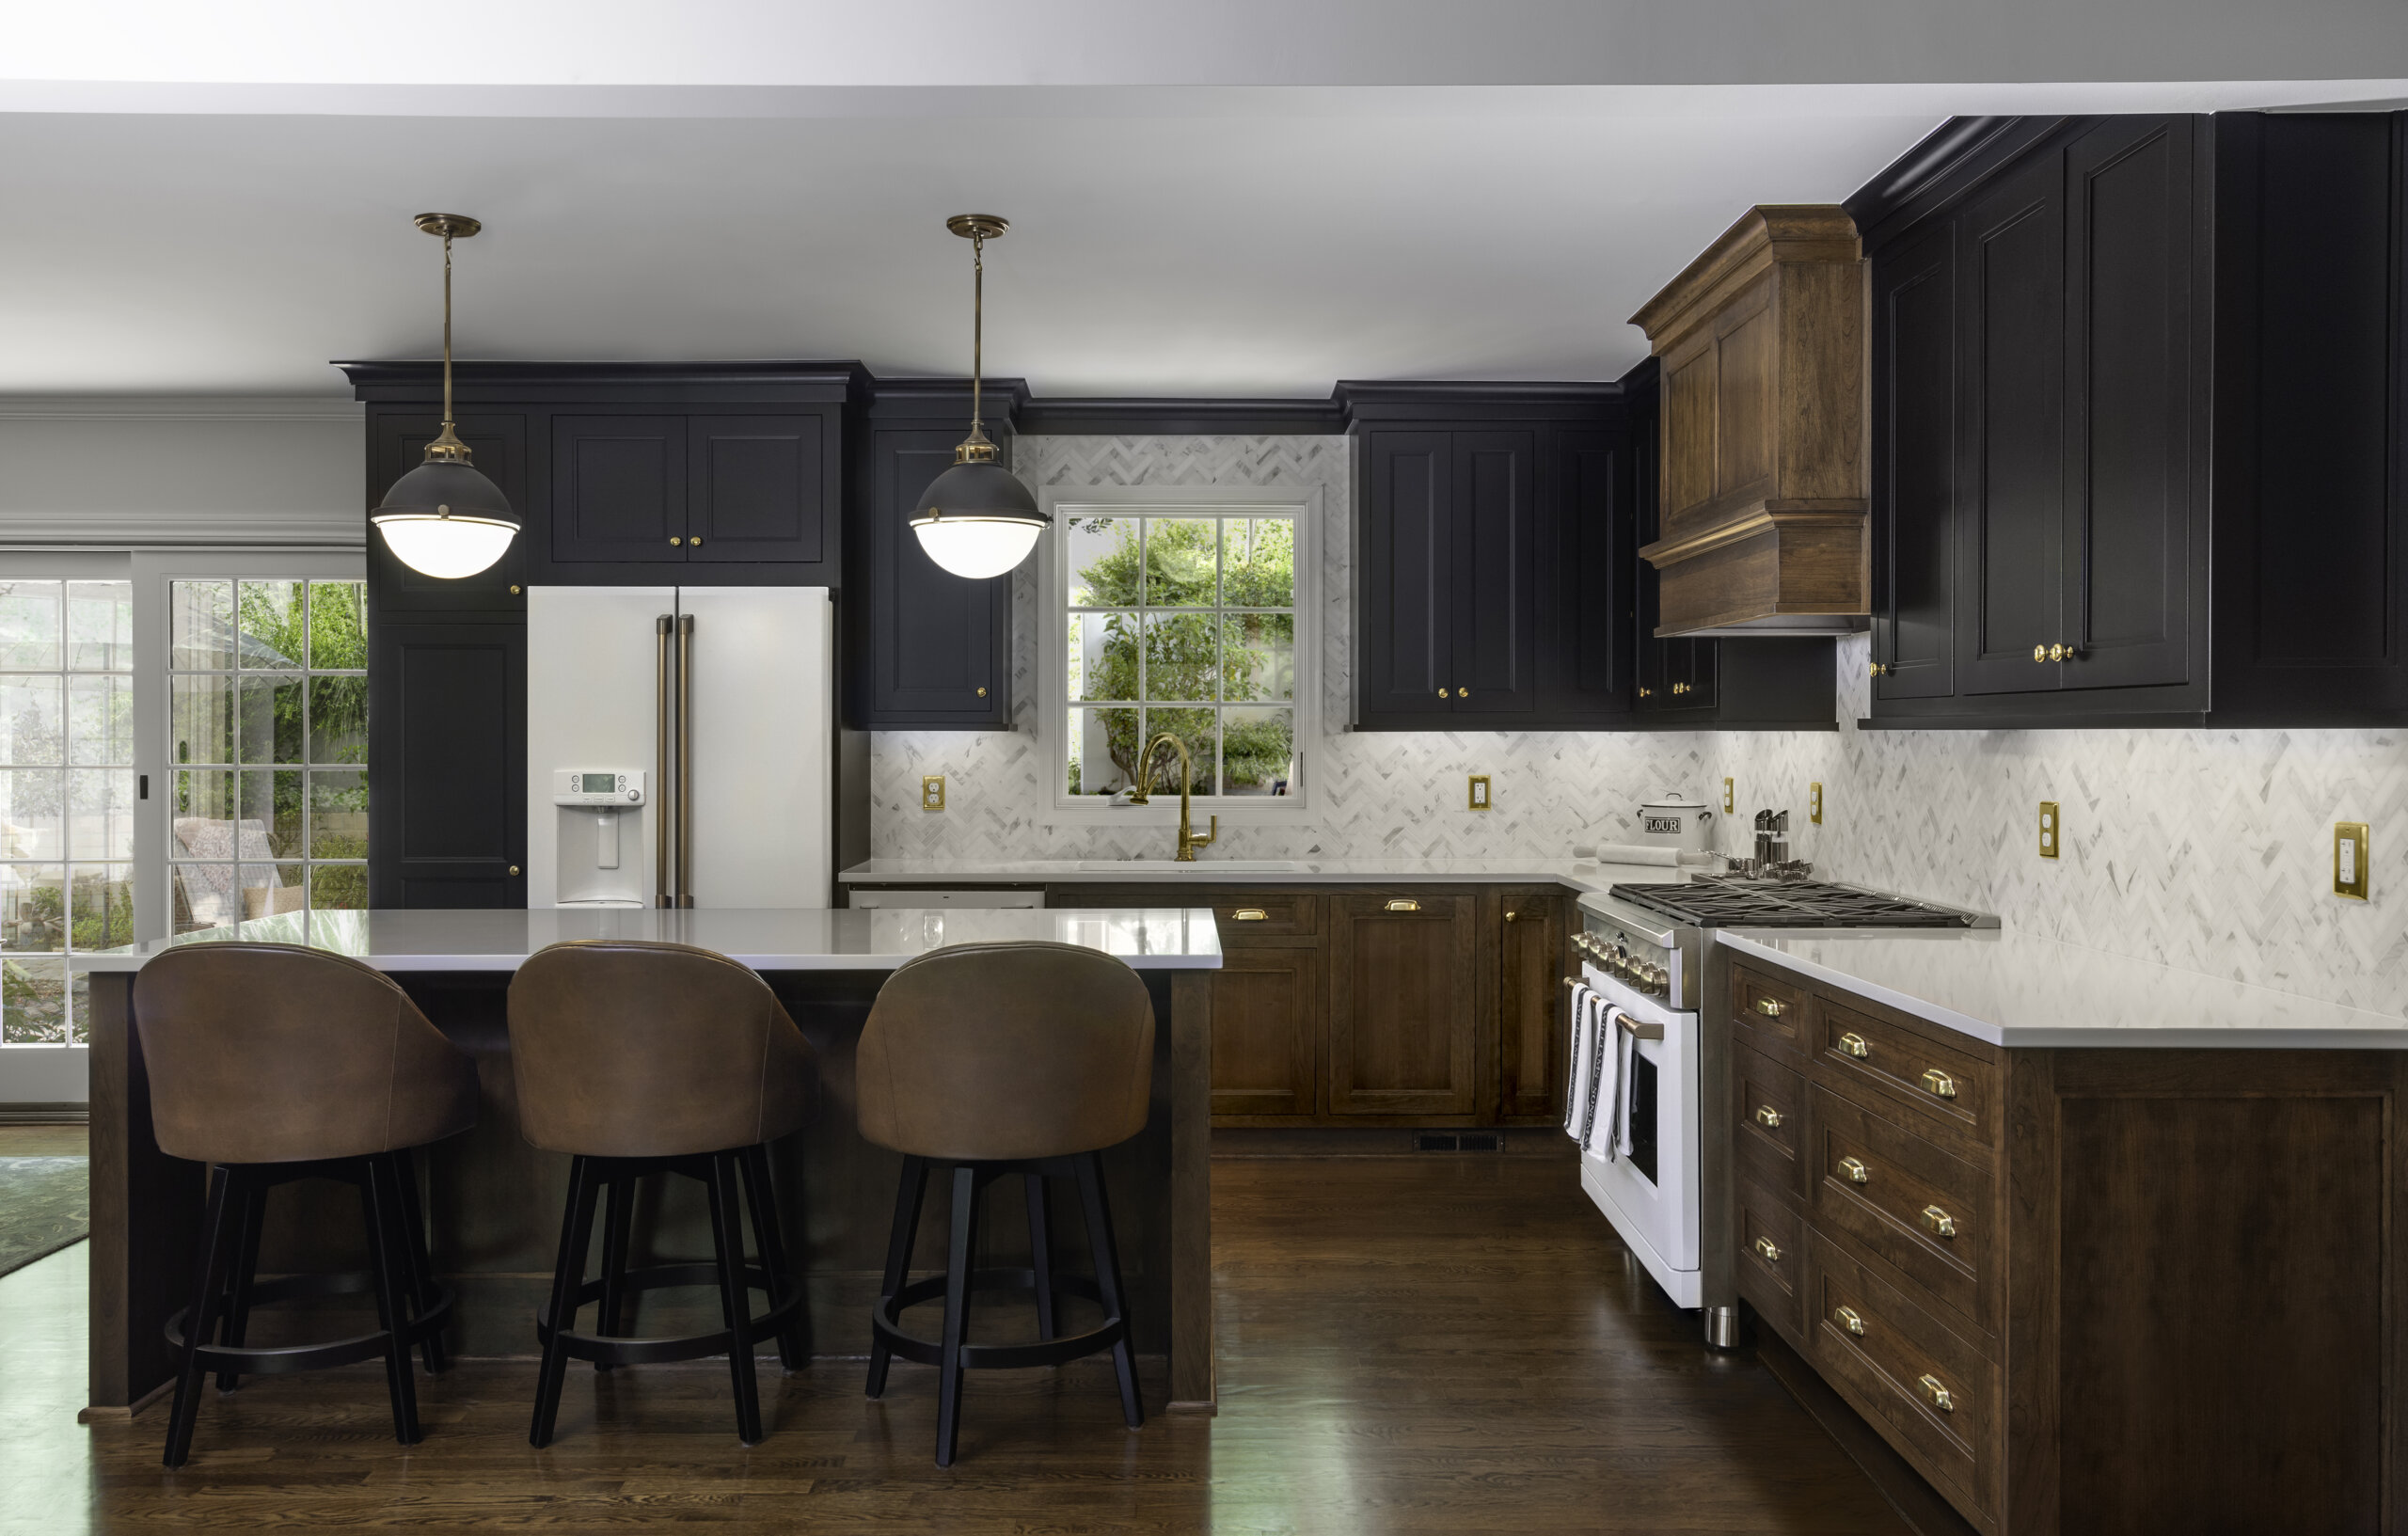 Hear the client’s cabinetry testimony about this beautiful black paint and cherry wood kitchen remodel project.